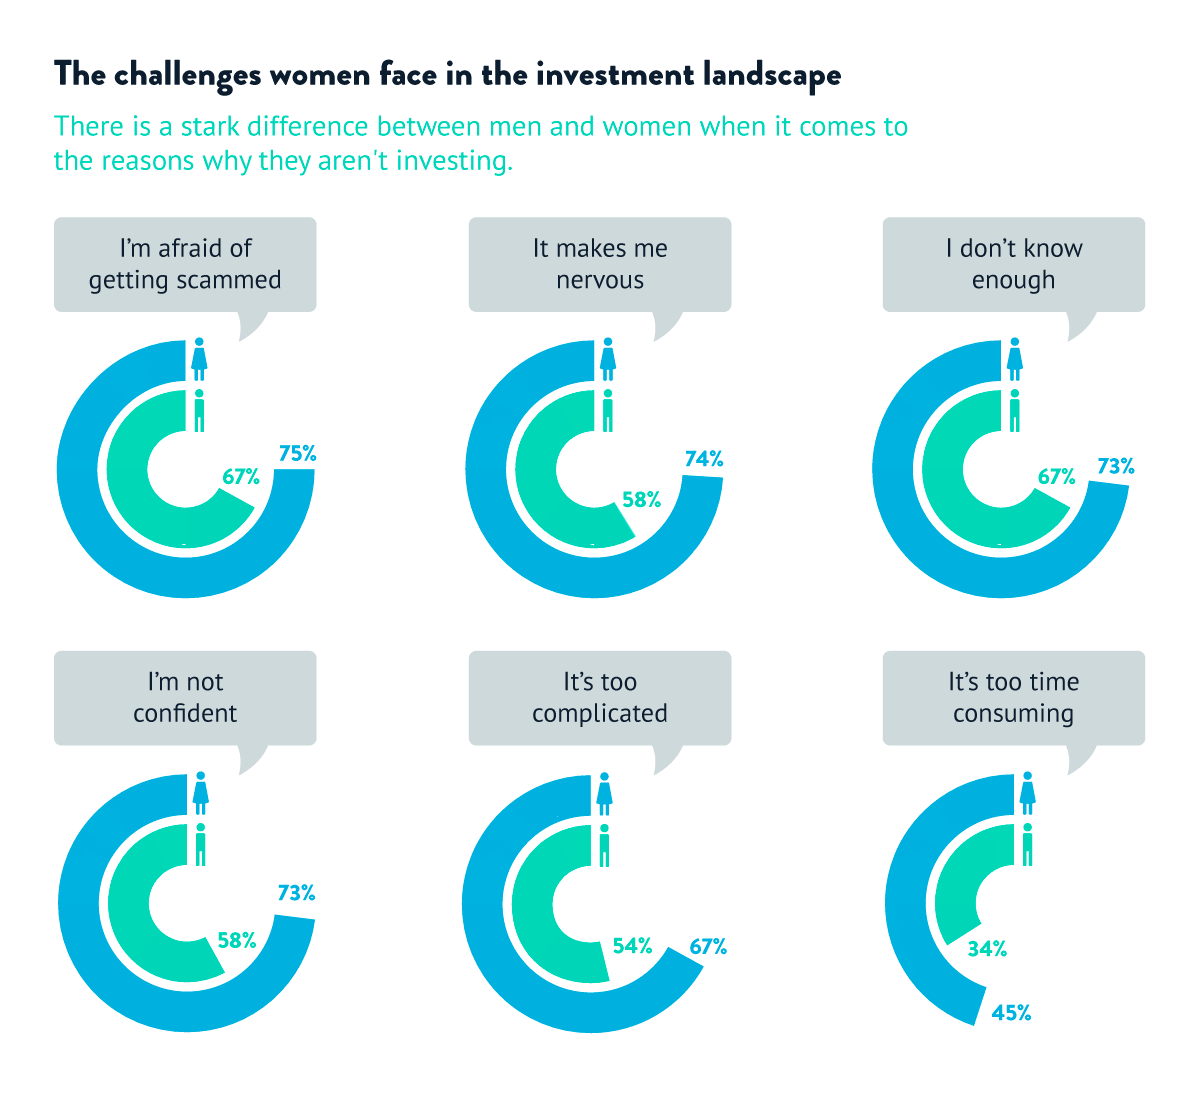 Graphs showing the challenges women face in the investment landscape. Women are not as confident, they think it's too complicated and it makes them nervous.